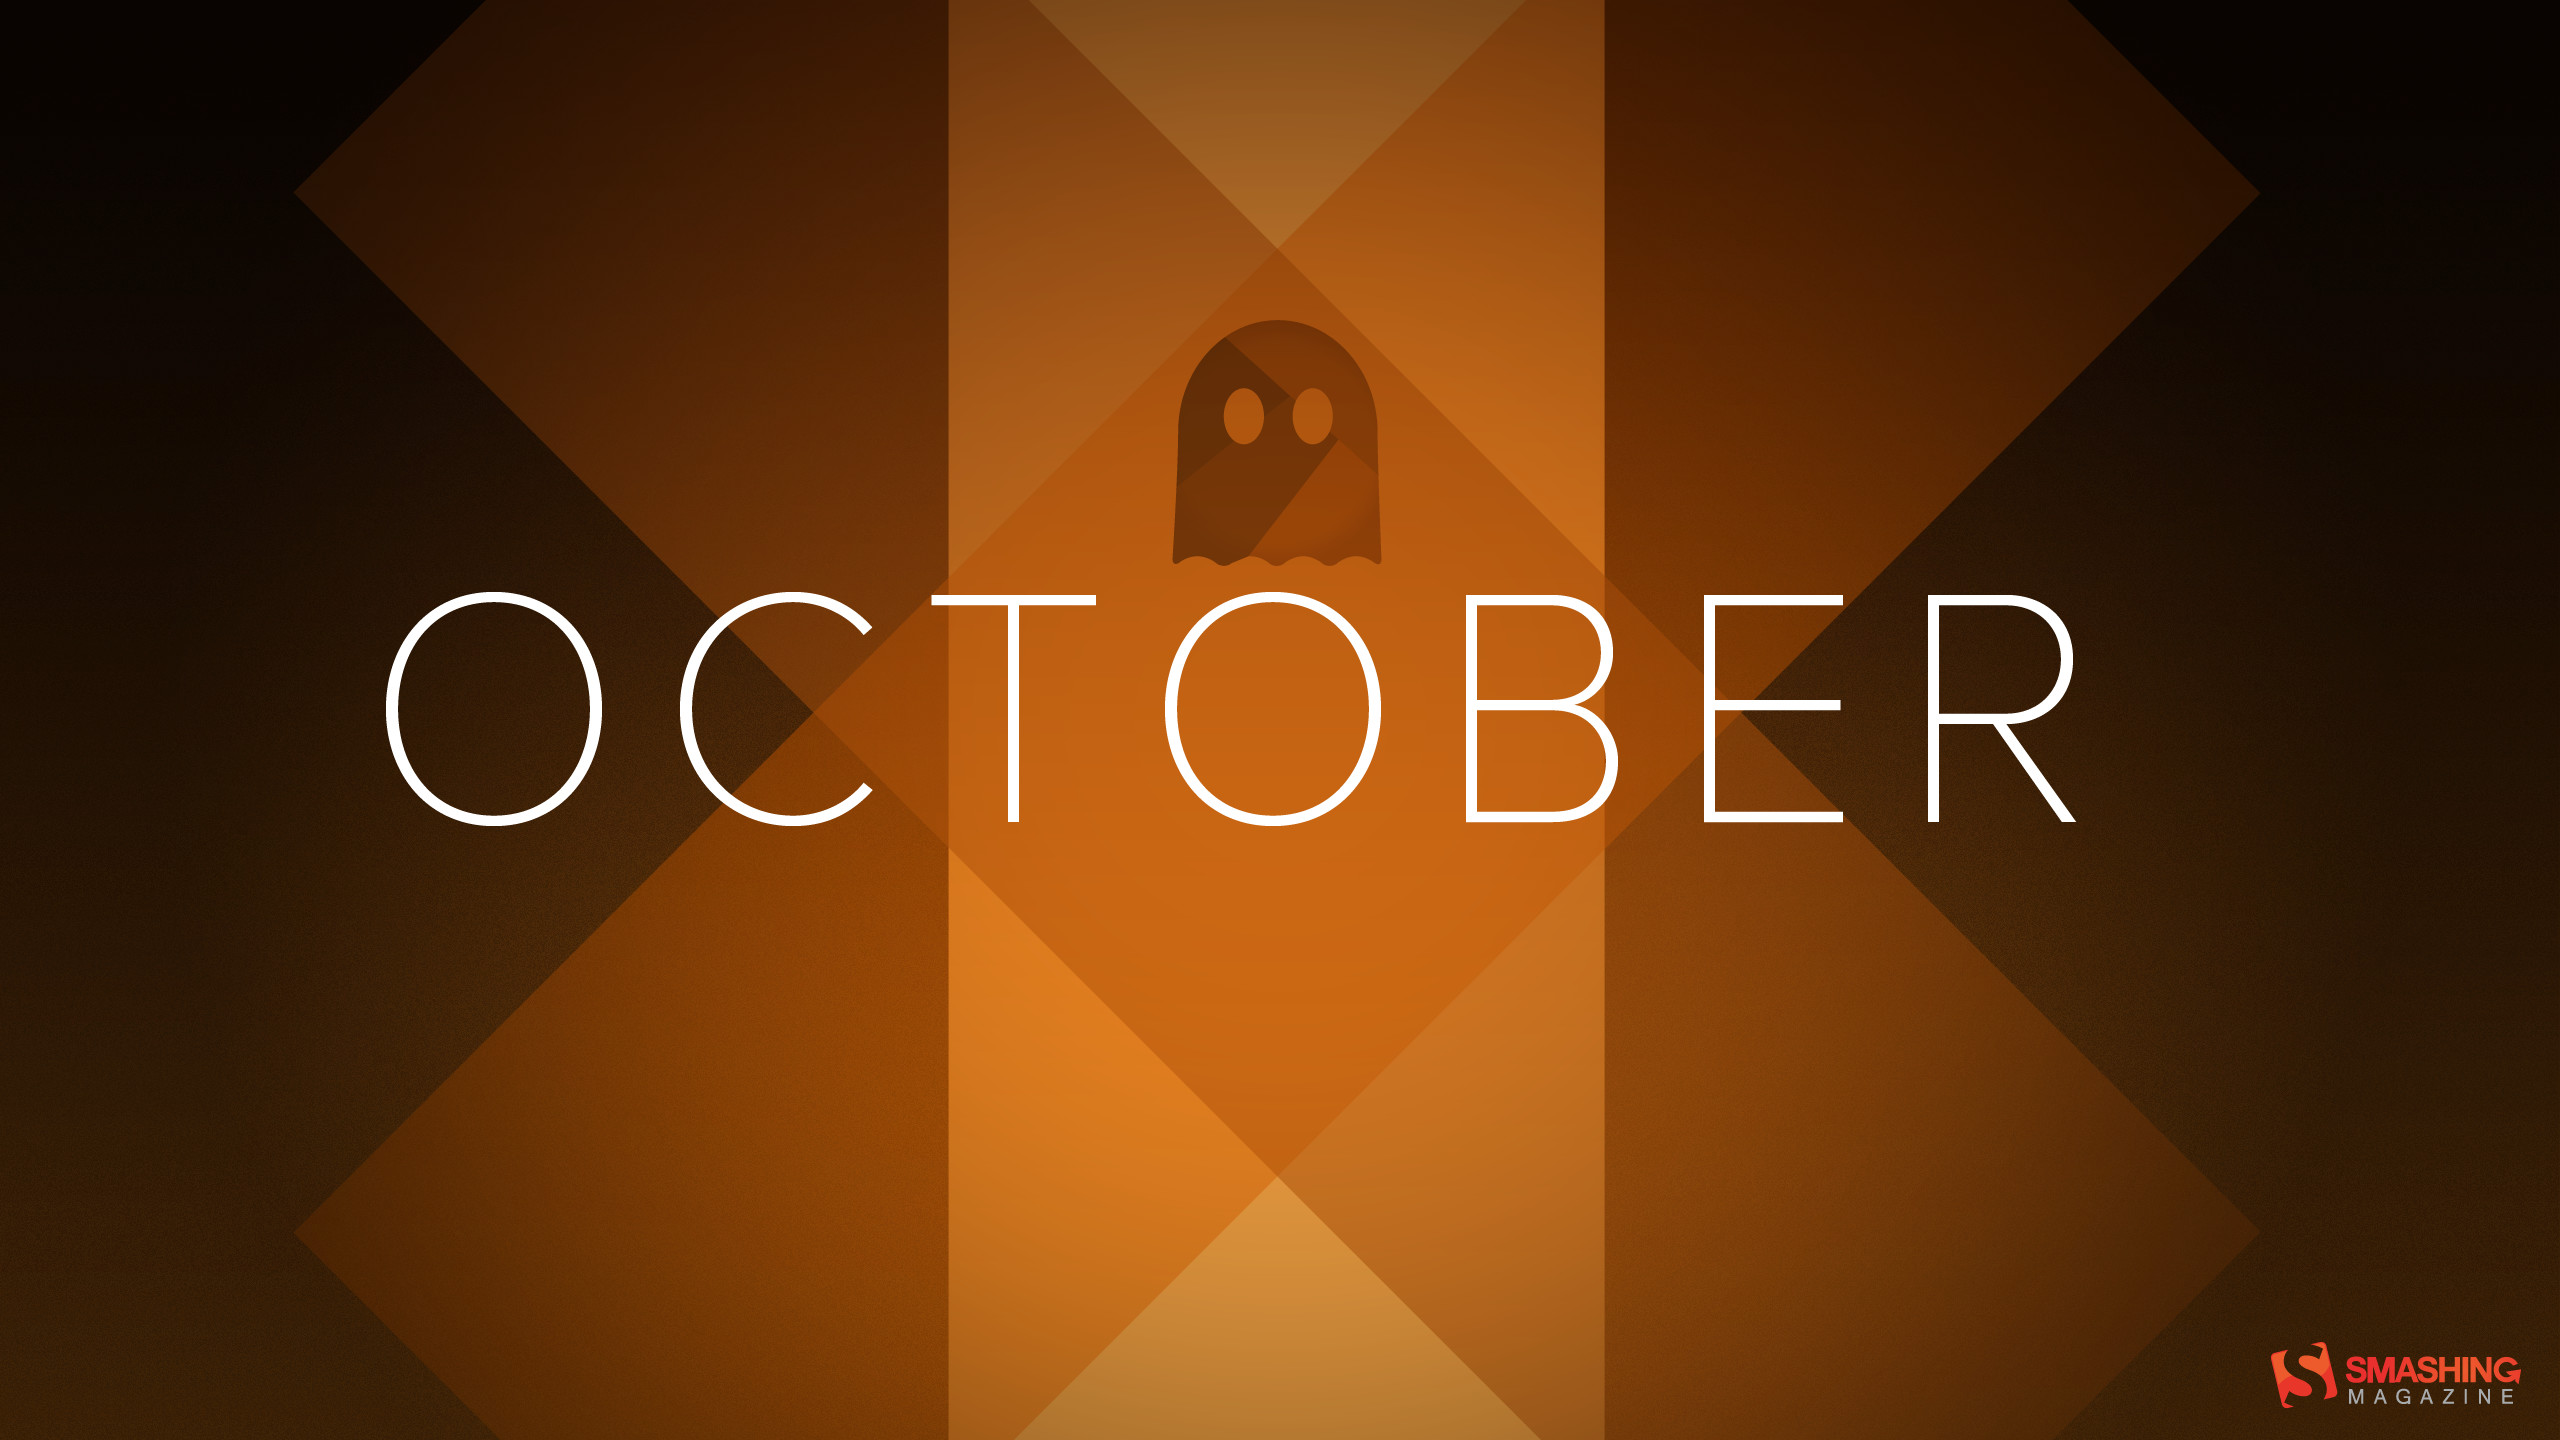 2560x1440 By Lindsay Pichon V.49: Amazing October Pictures & Backgrounds